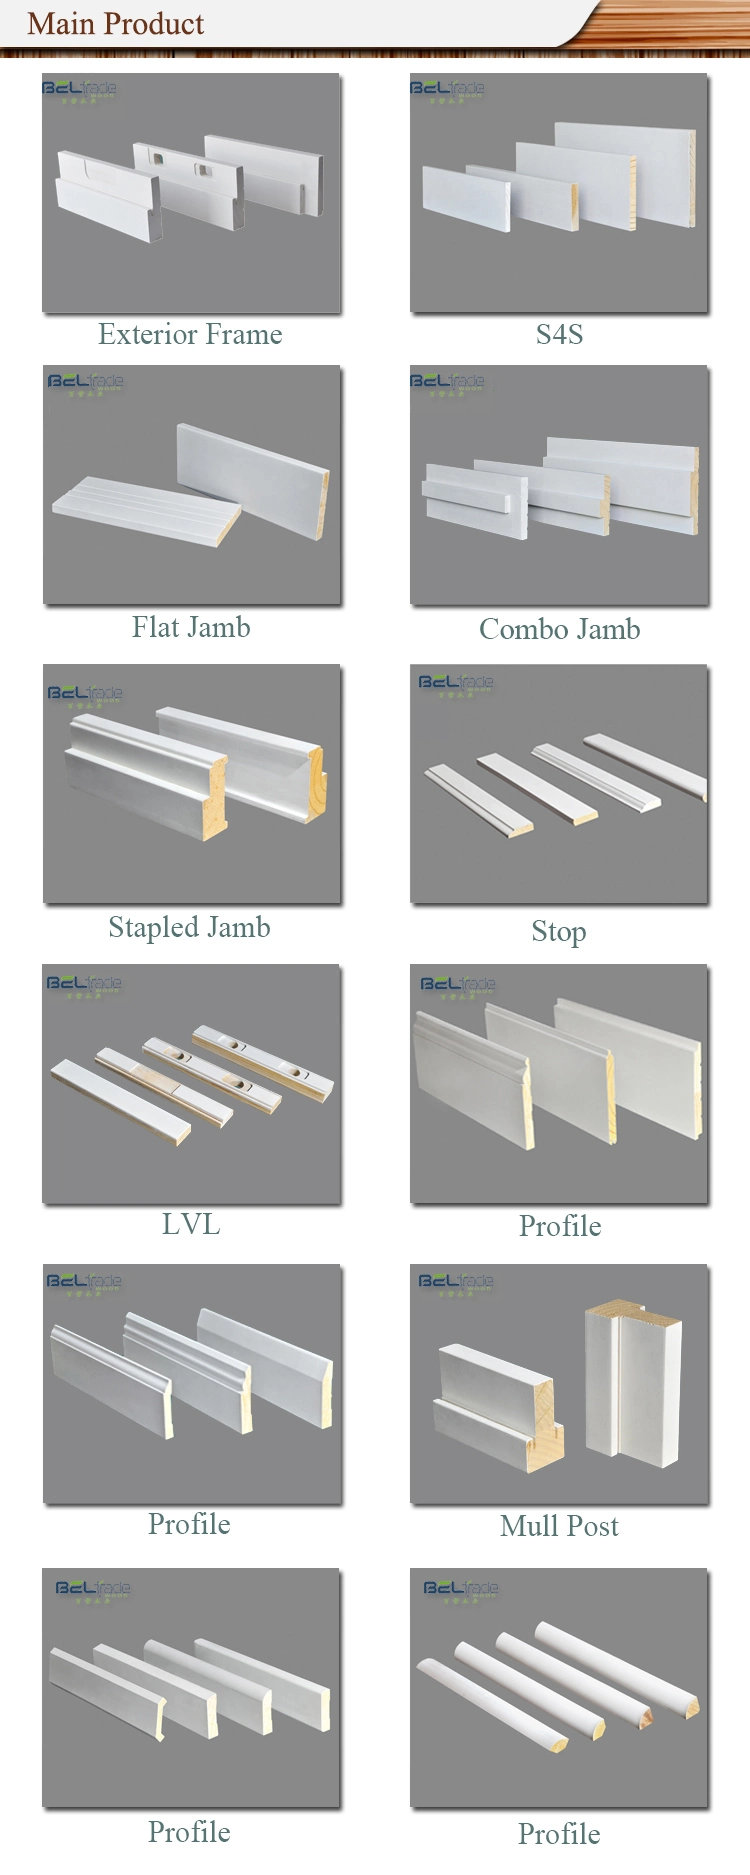 Crown Moulding Design Moulding Install Decorative White Crown Moulding Accessories